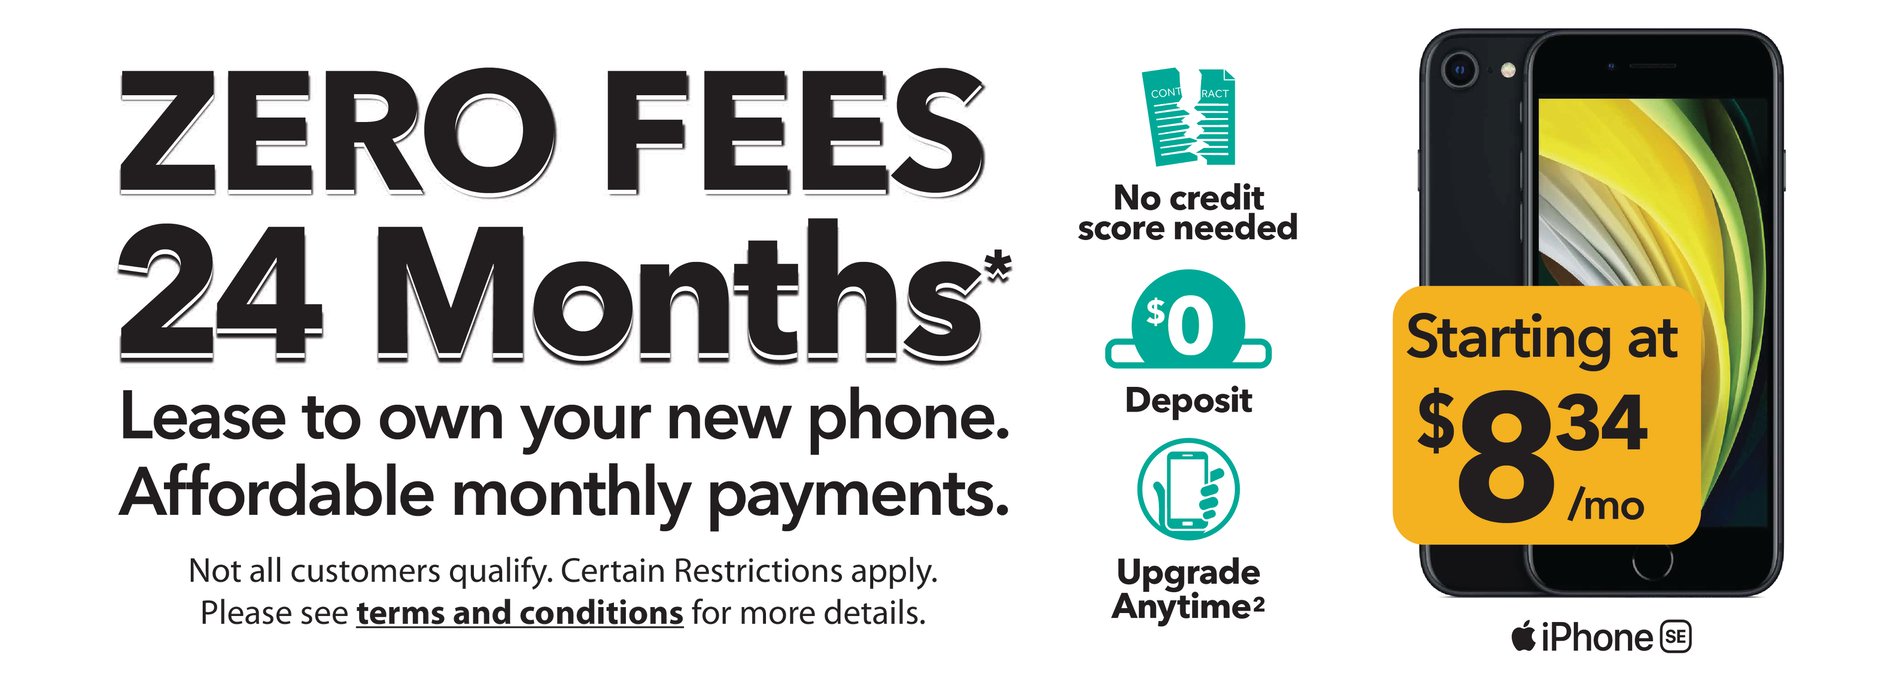 Zero fees for 24 months.  Lease to own your own phone at affordable monthly rates